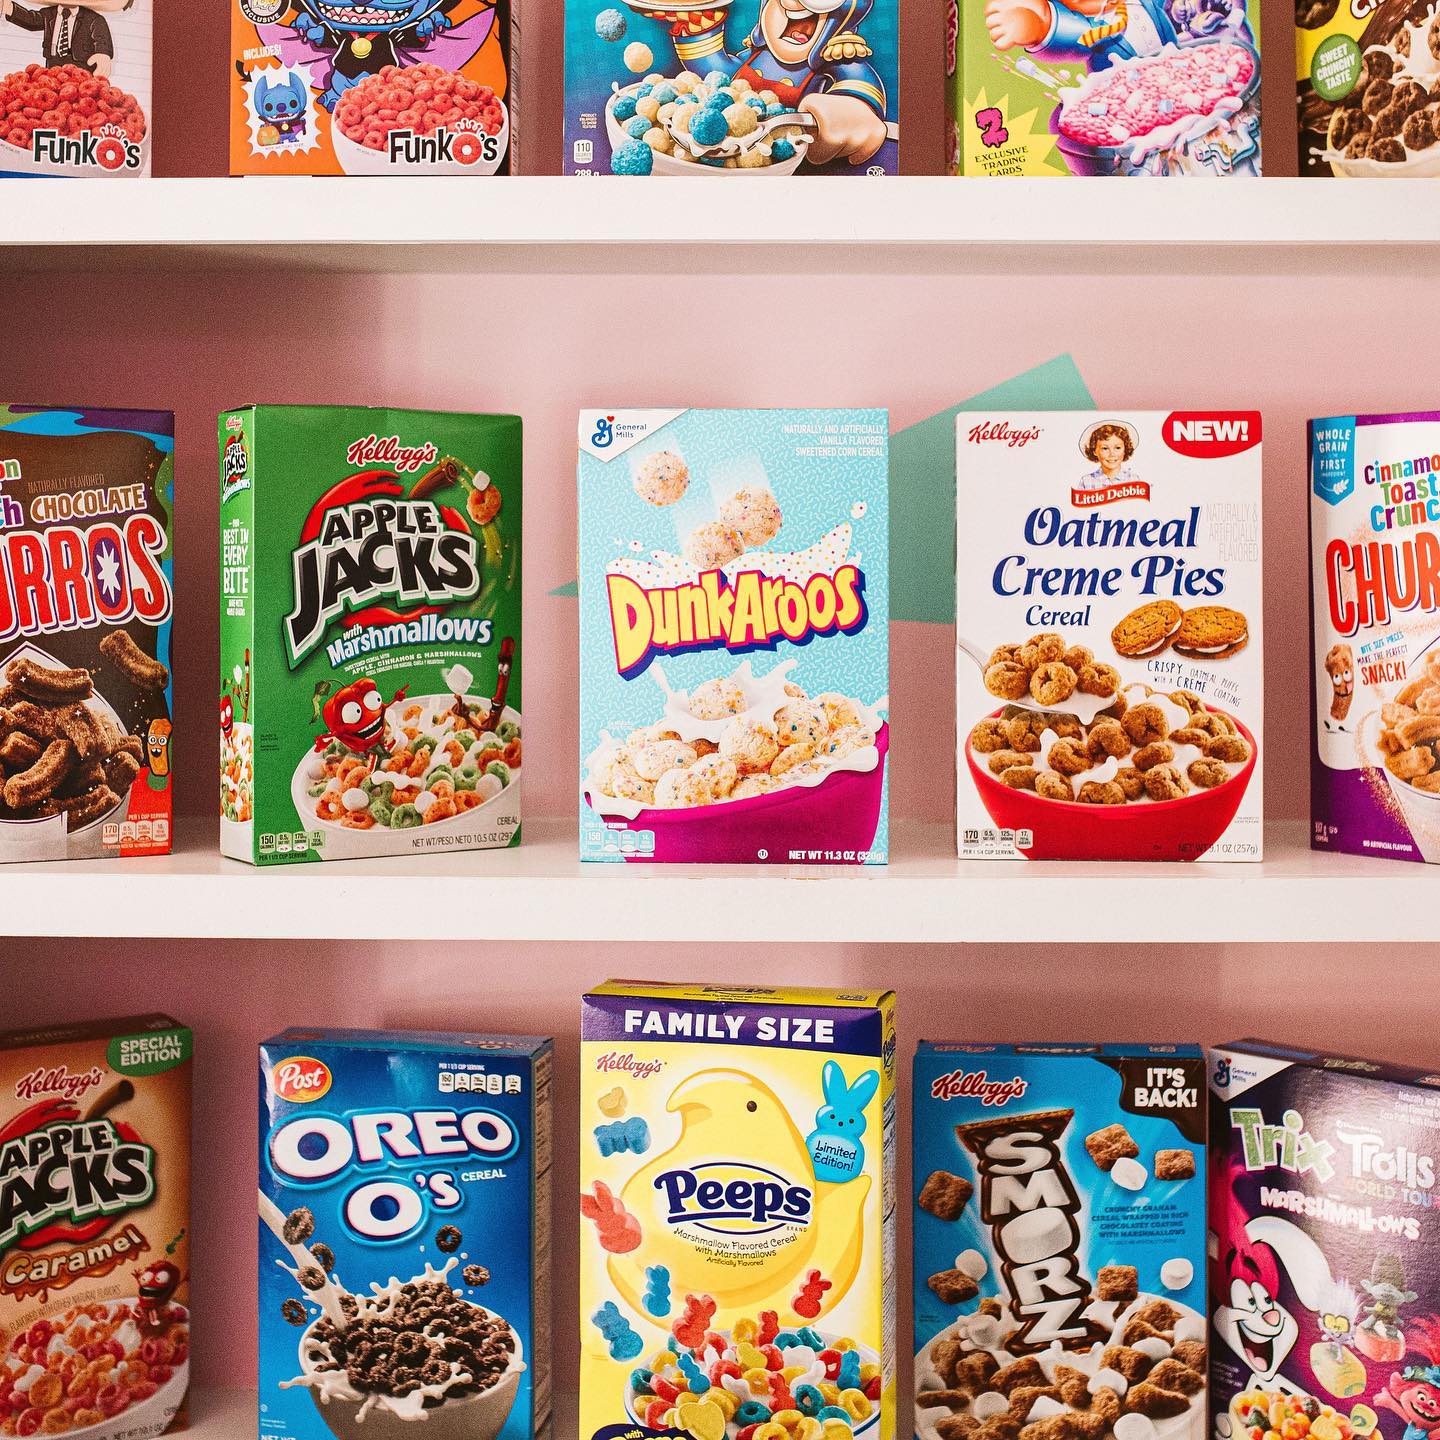 Powder pink shelves lined with name brand cereals like Apple Jacks, Dunkaroos, and Oatmeal Cream Pies from Day and Night Cereal Bar. 